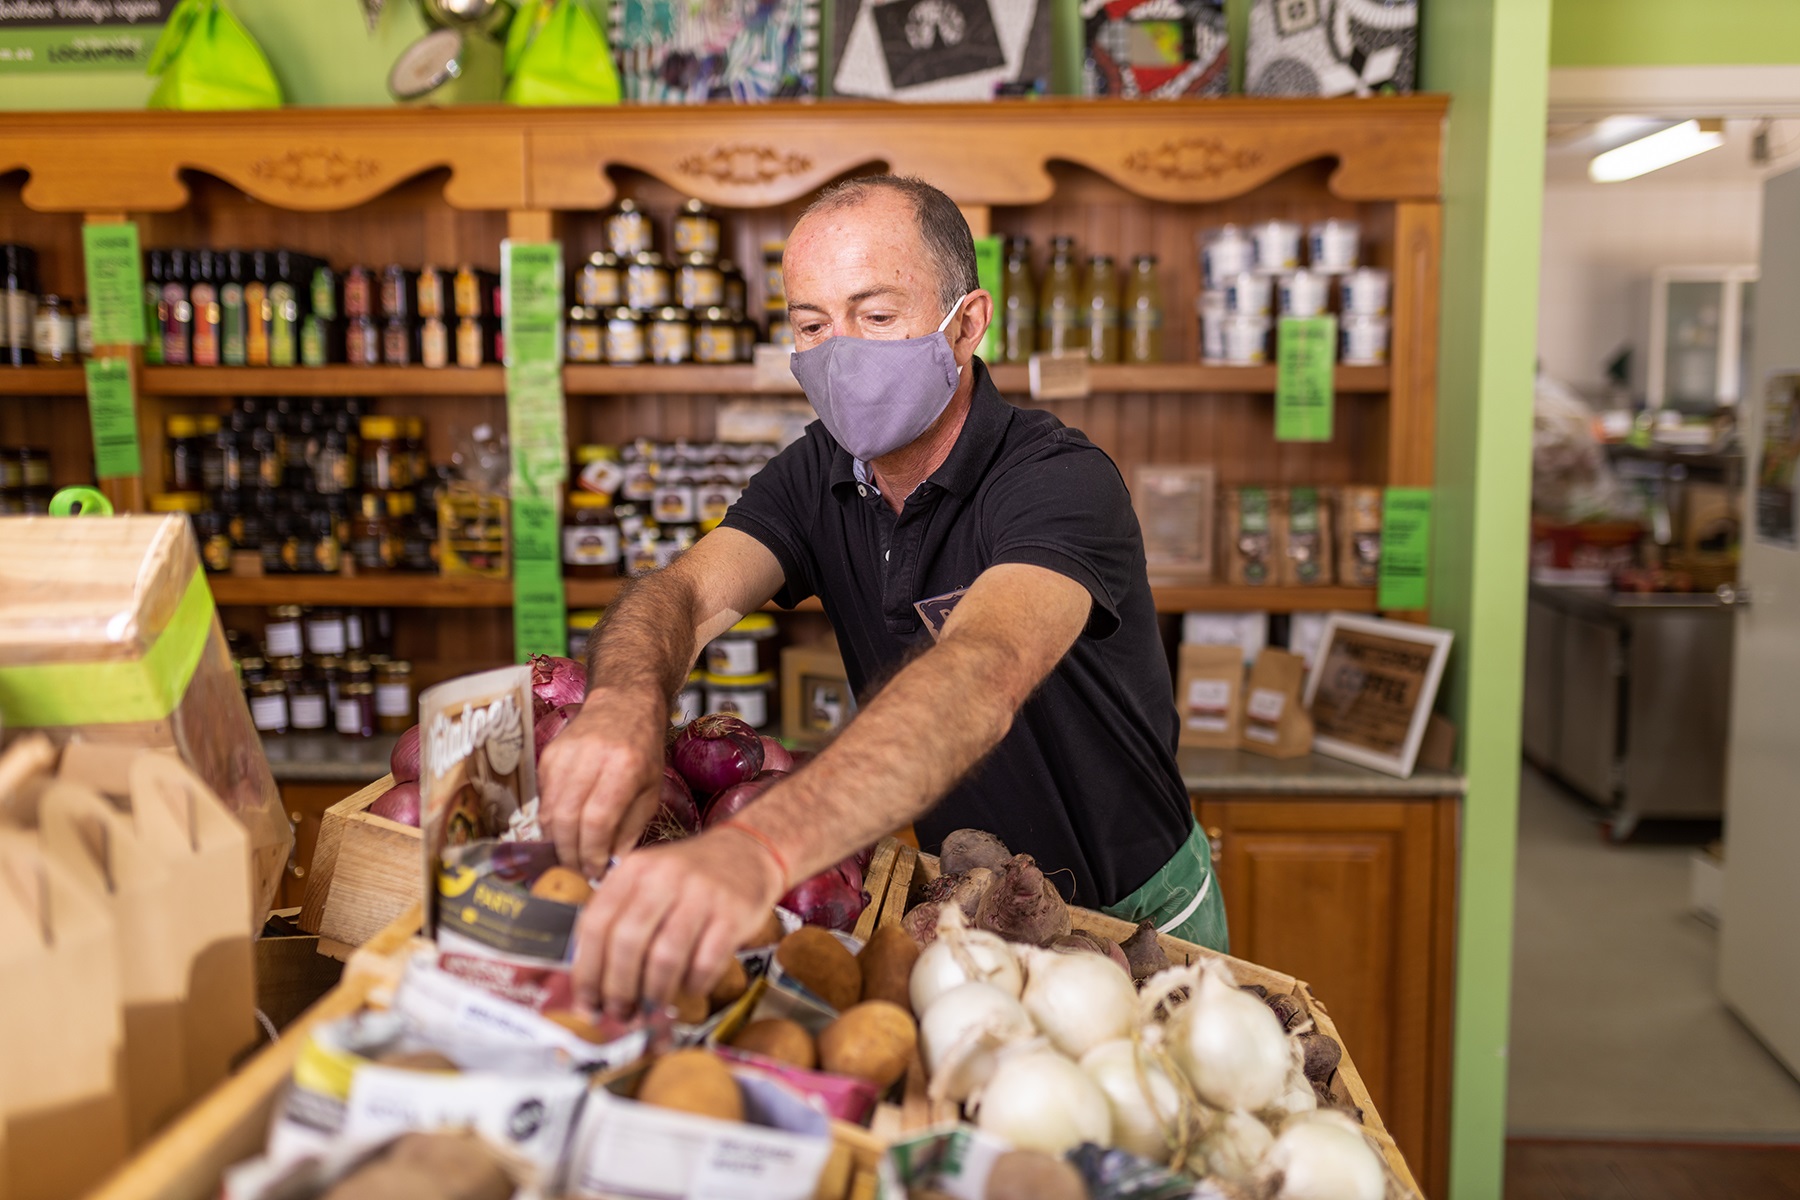 Photo of a man arranging a display of vegetables in a food business. He is wearing a mask as part of COVID-19 health and safety protocols.